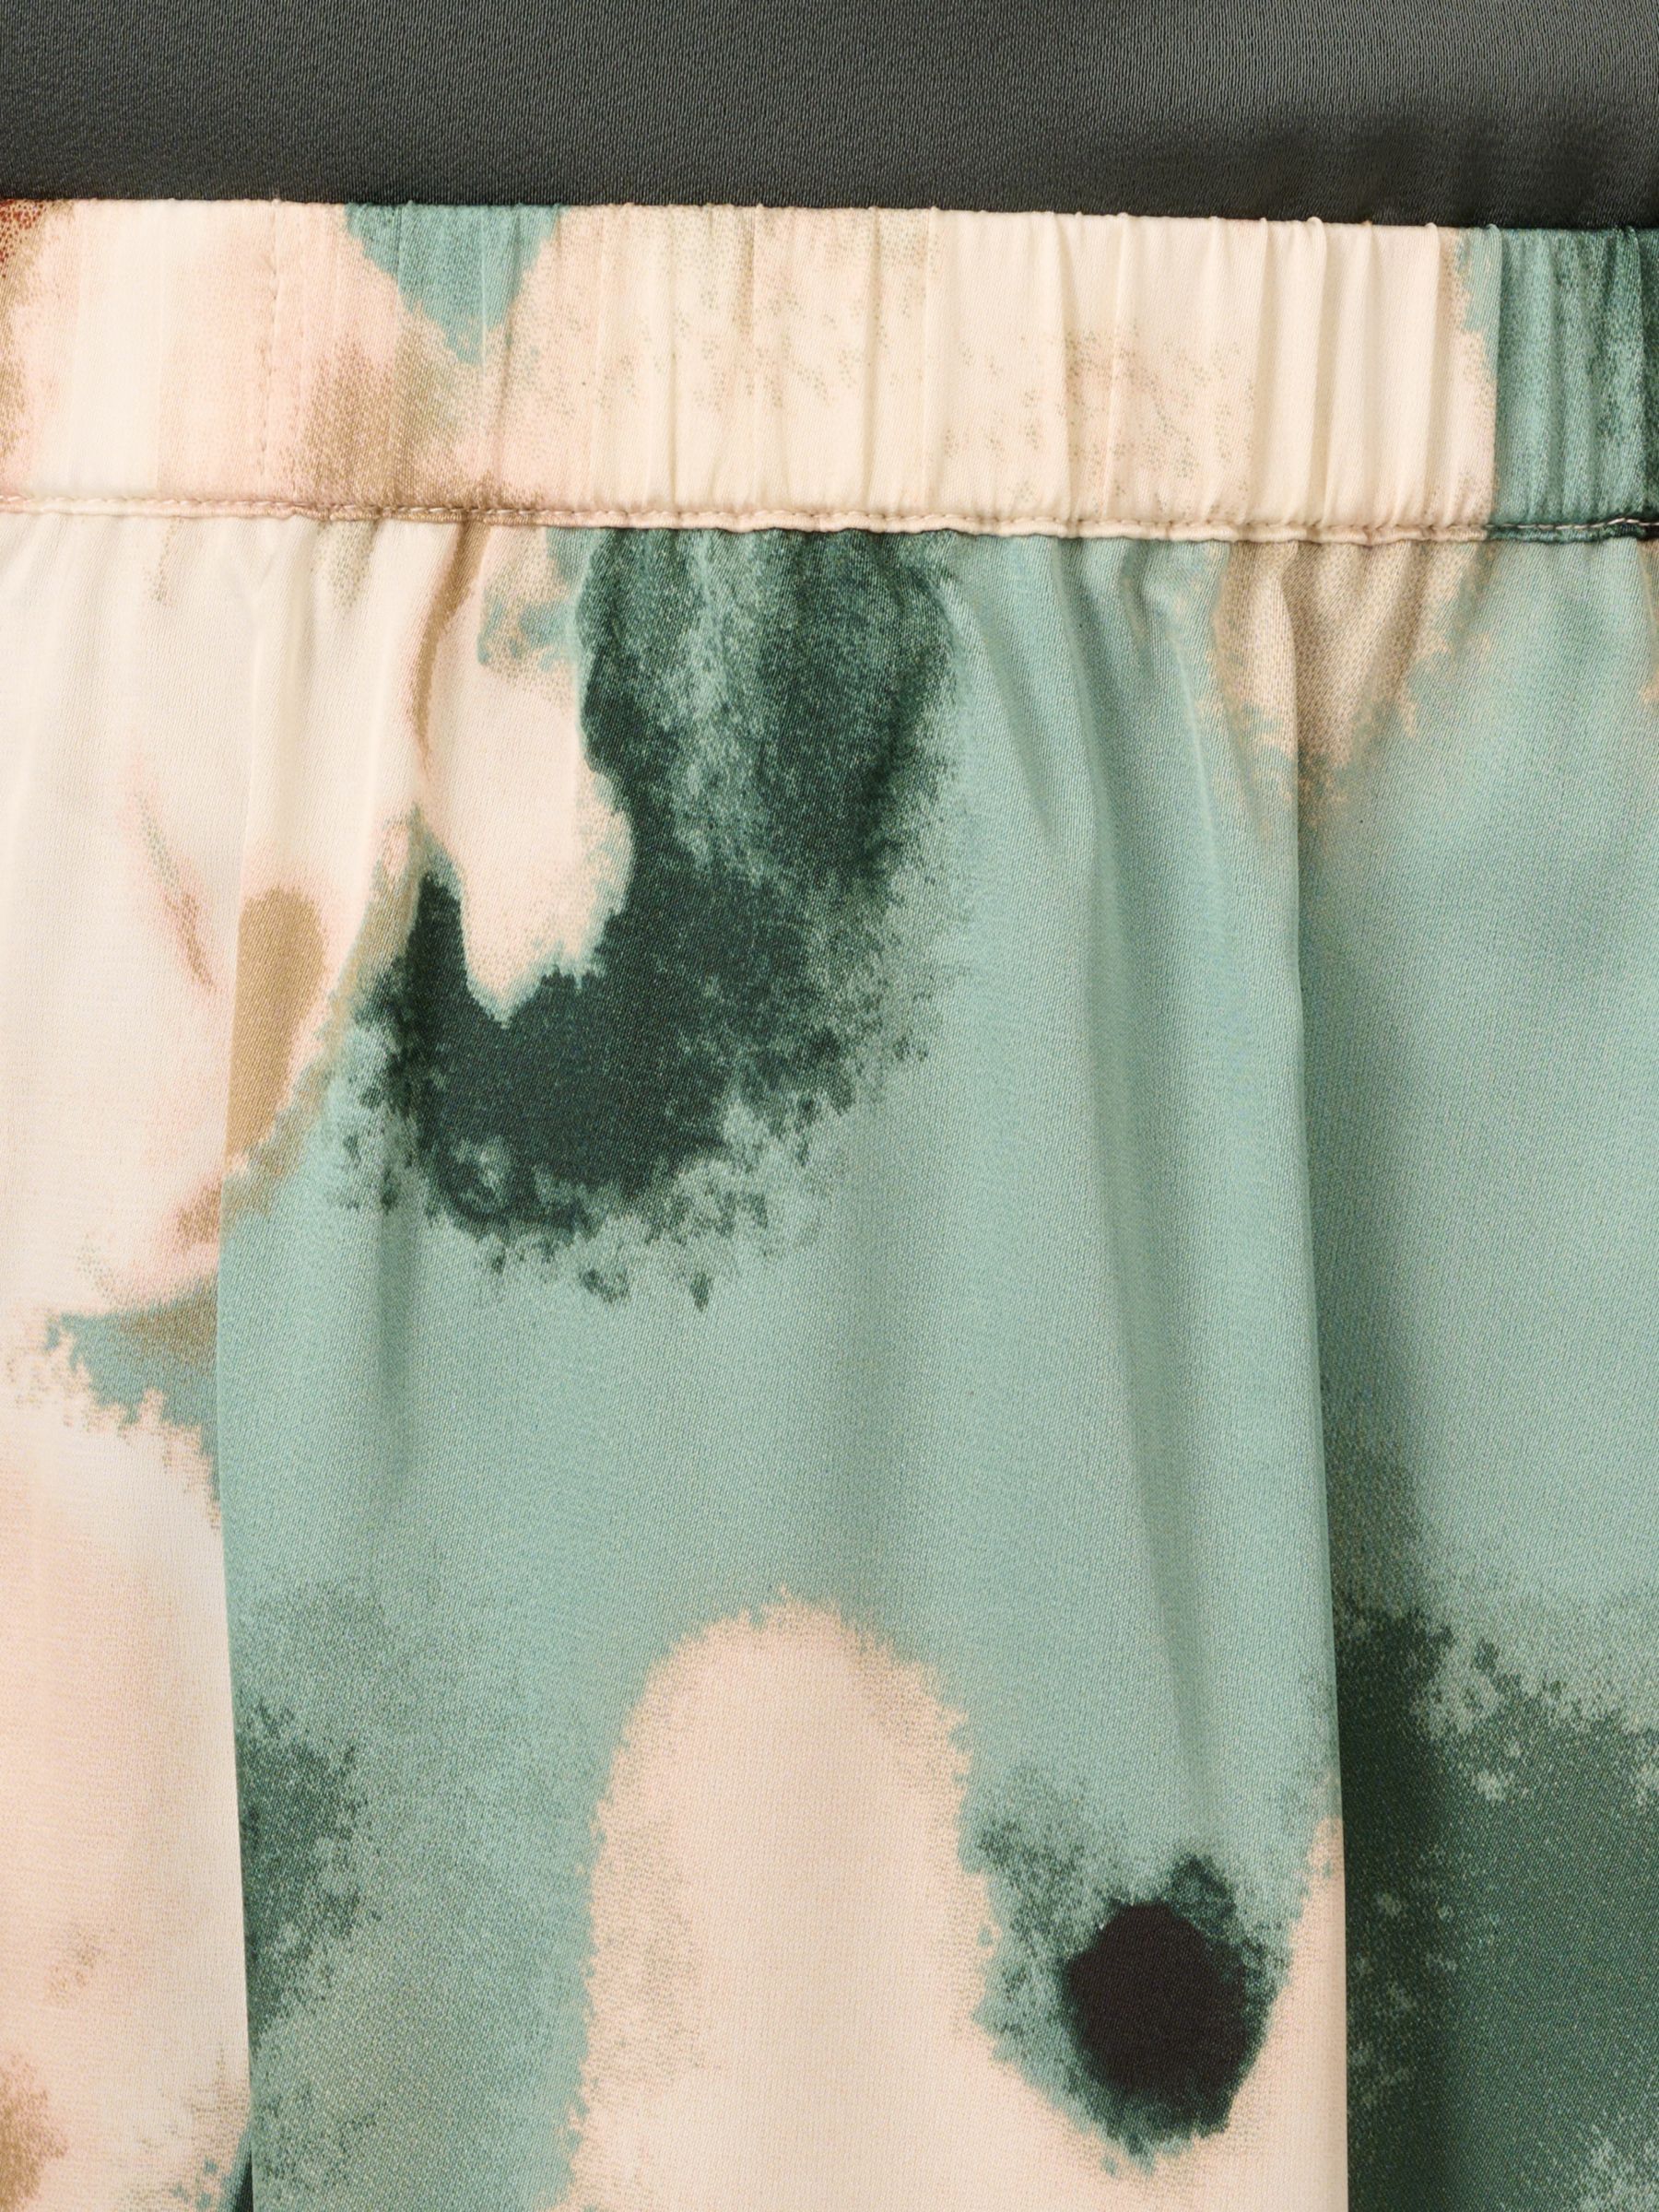 Buy Adrianna Papell Printed A-Line Skirt, Dusty Seafoam Online at johnlewis.com